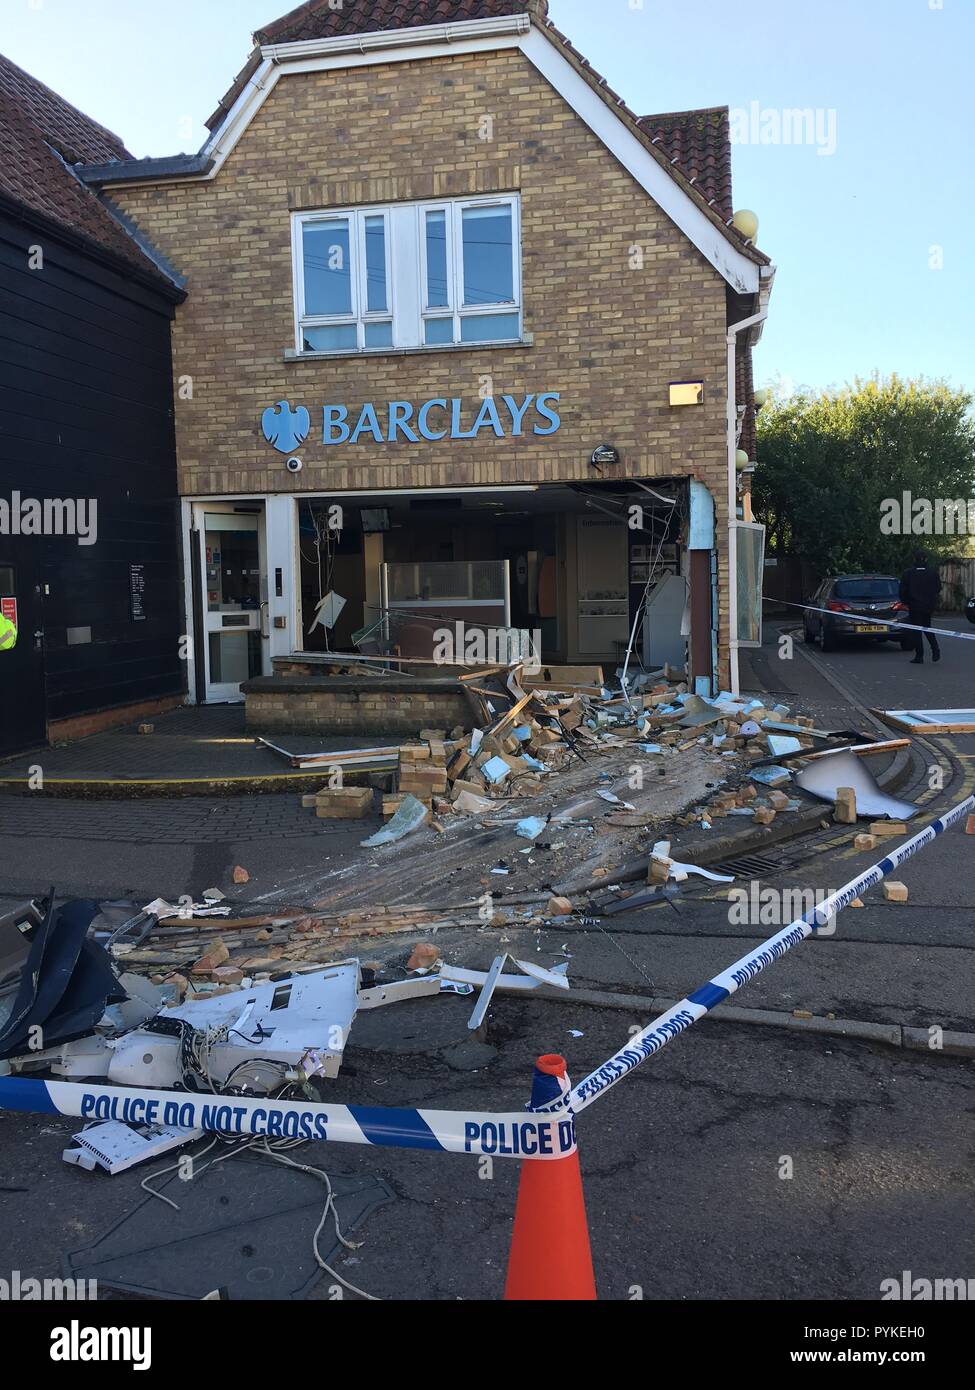 Great Shelford, Cambridgeshire, UK. 29th Oct, 2018. Police say that the raid happened at 2am. The JCB pictured was used to knock down the wall of the building. No one was hurt. Great Shelford Branch of Barclays Bank. Ram Raid Credit: Andrew Brown/Alamy Live News Stock Photo